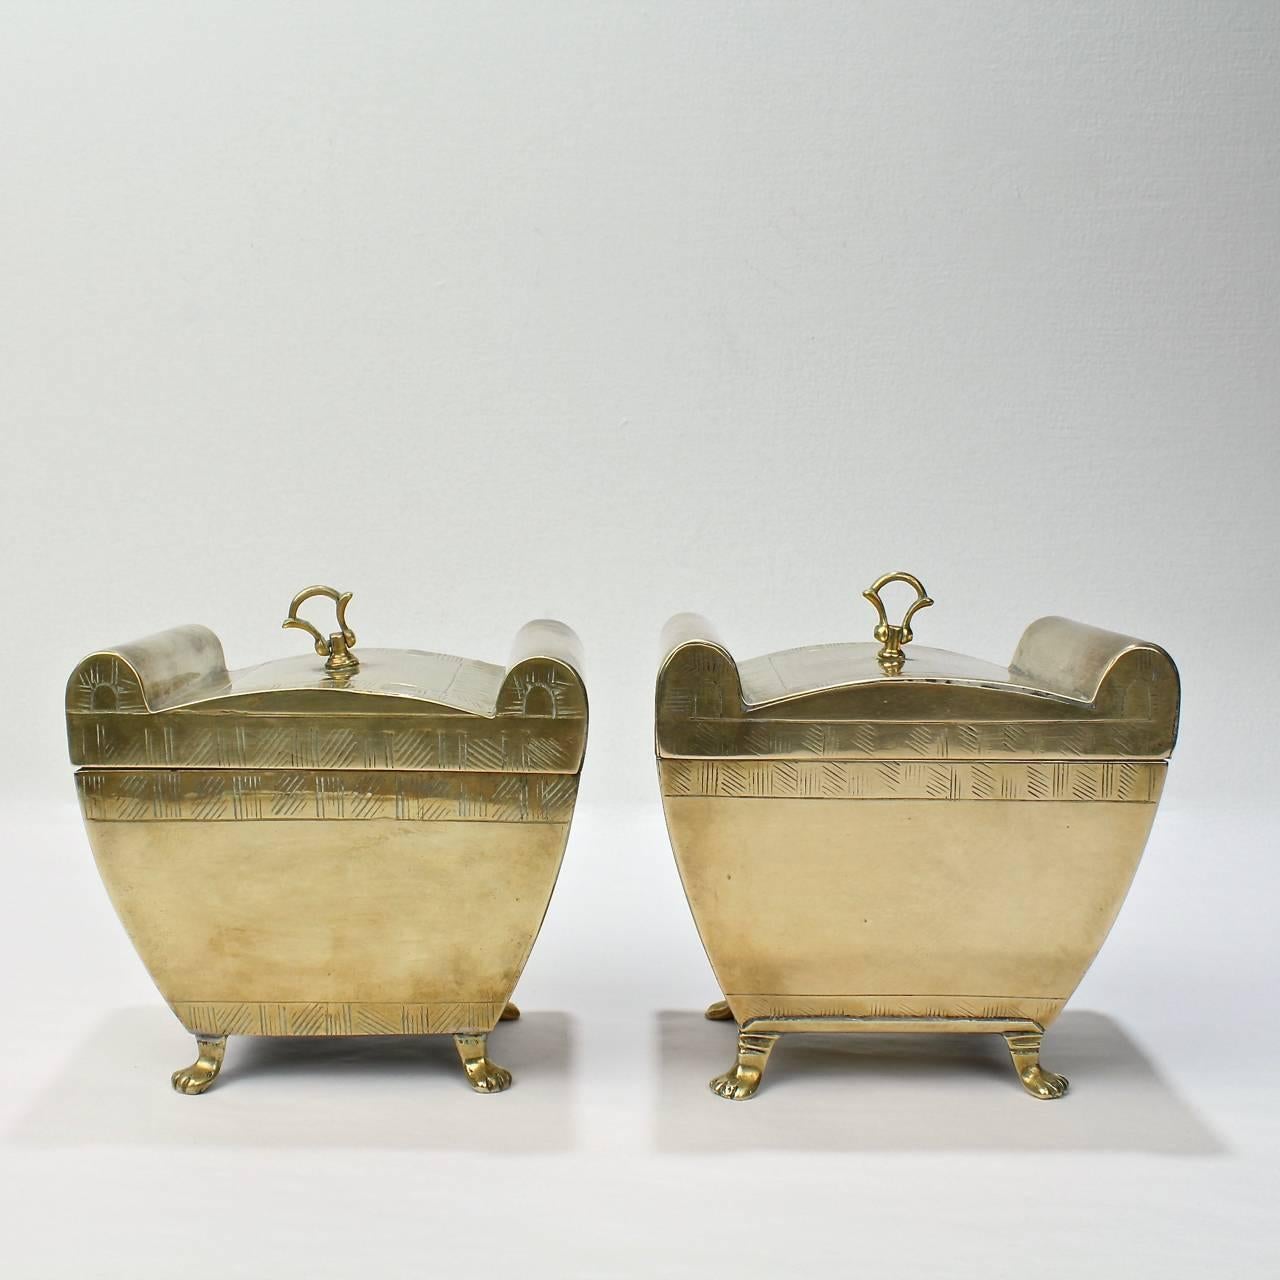 19th Century Matched Pair of English Colonial or Anglo-Indian Brass Tea Caddies